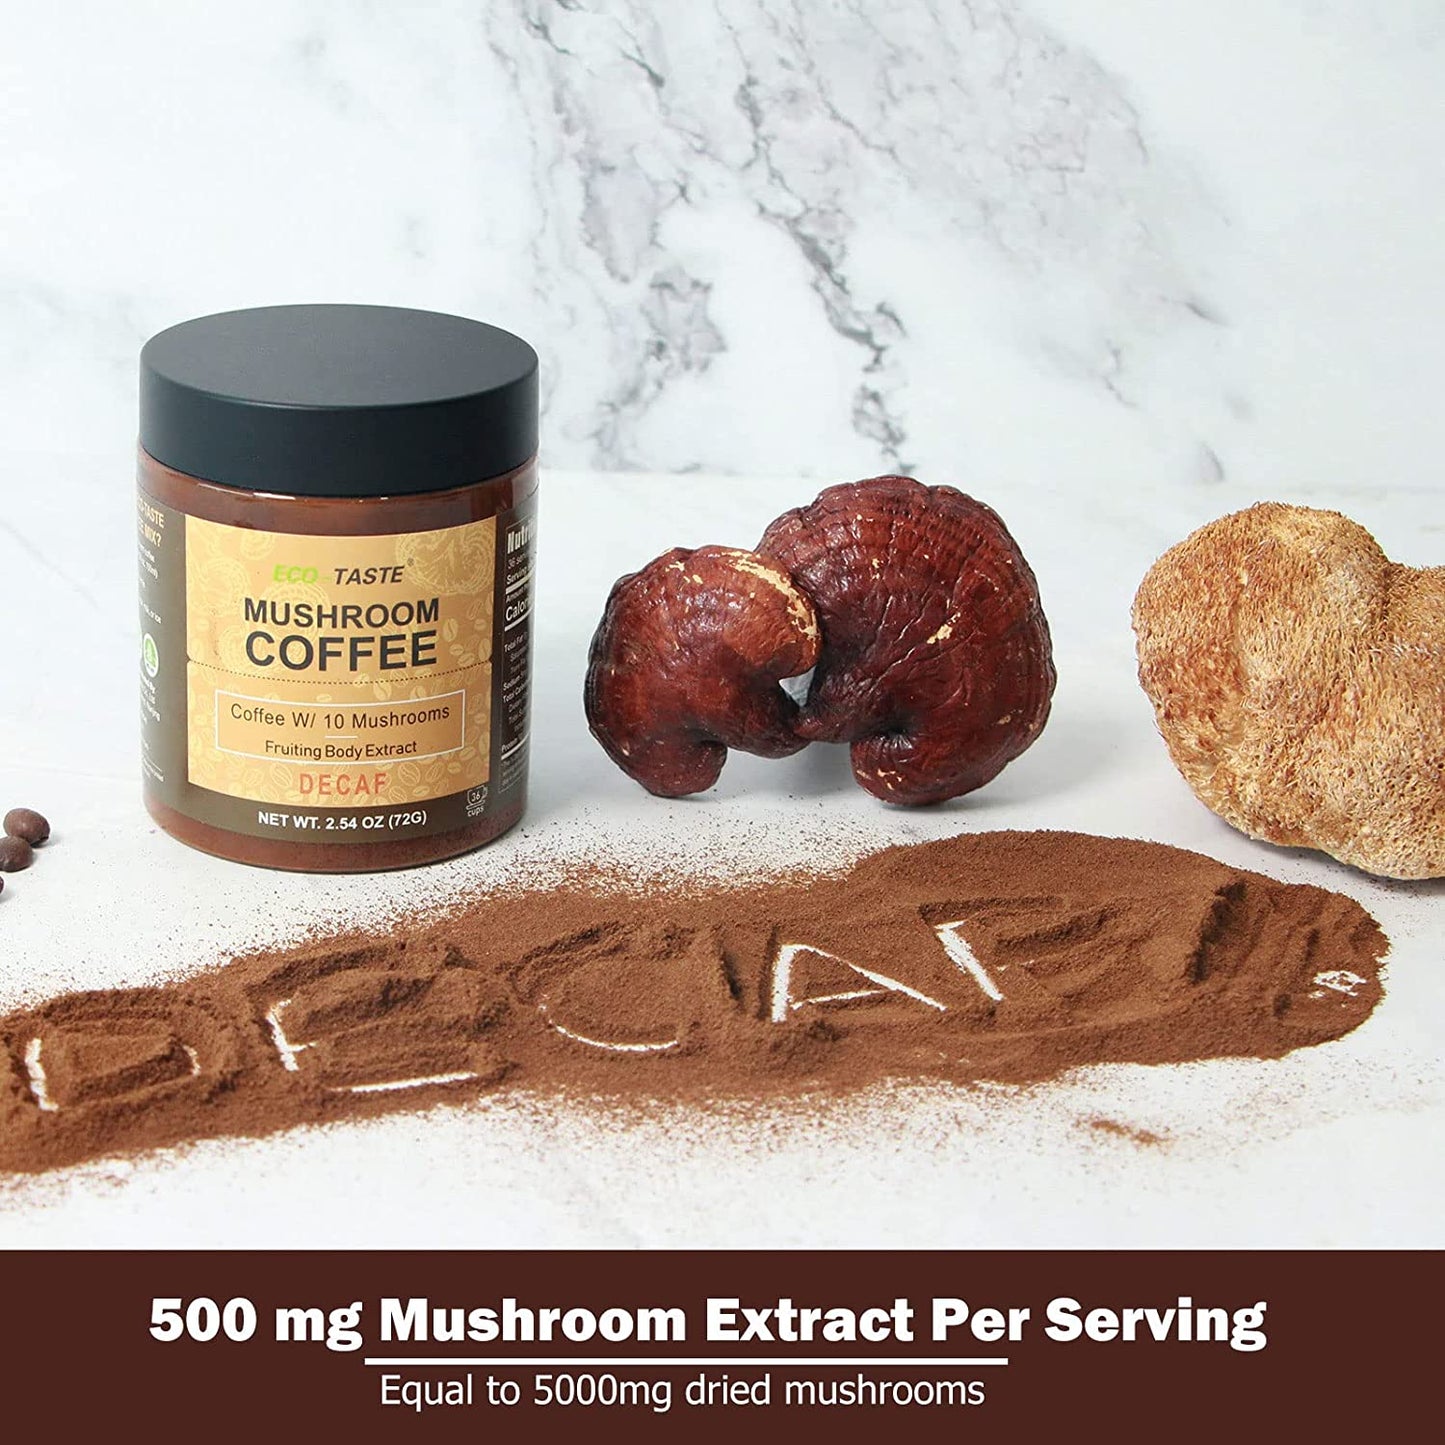 Decaf Mushroom Coffee - 36 Servings, Instant Coffee Mix Includes 10 Mushrooms Extract Powder 2.12oz